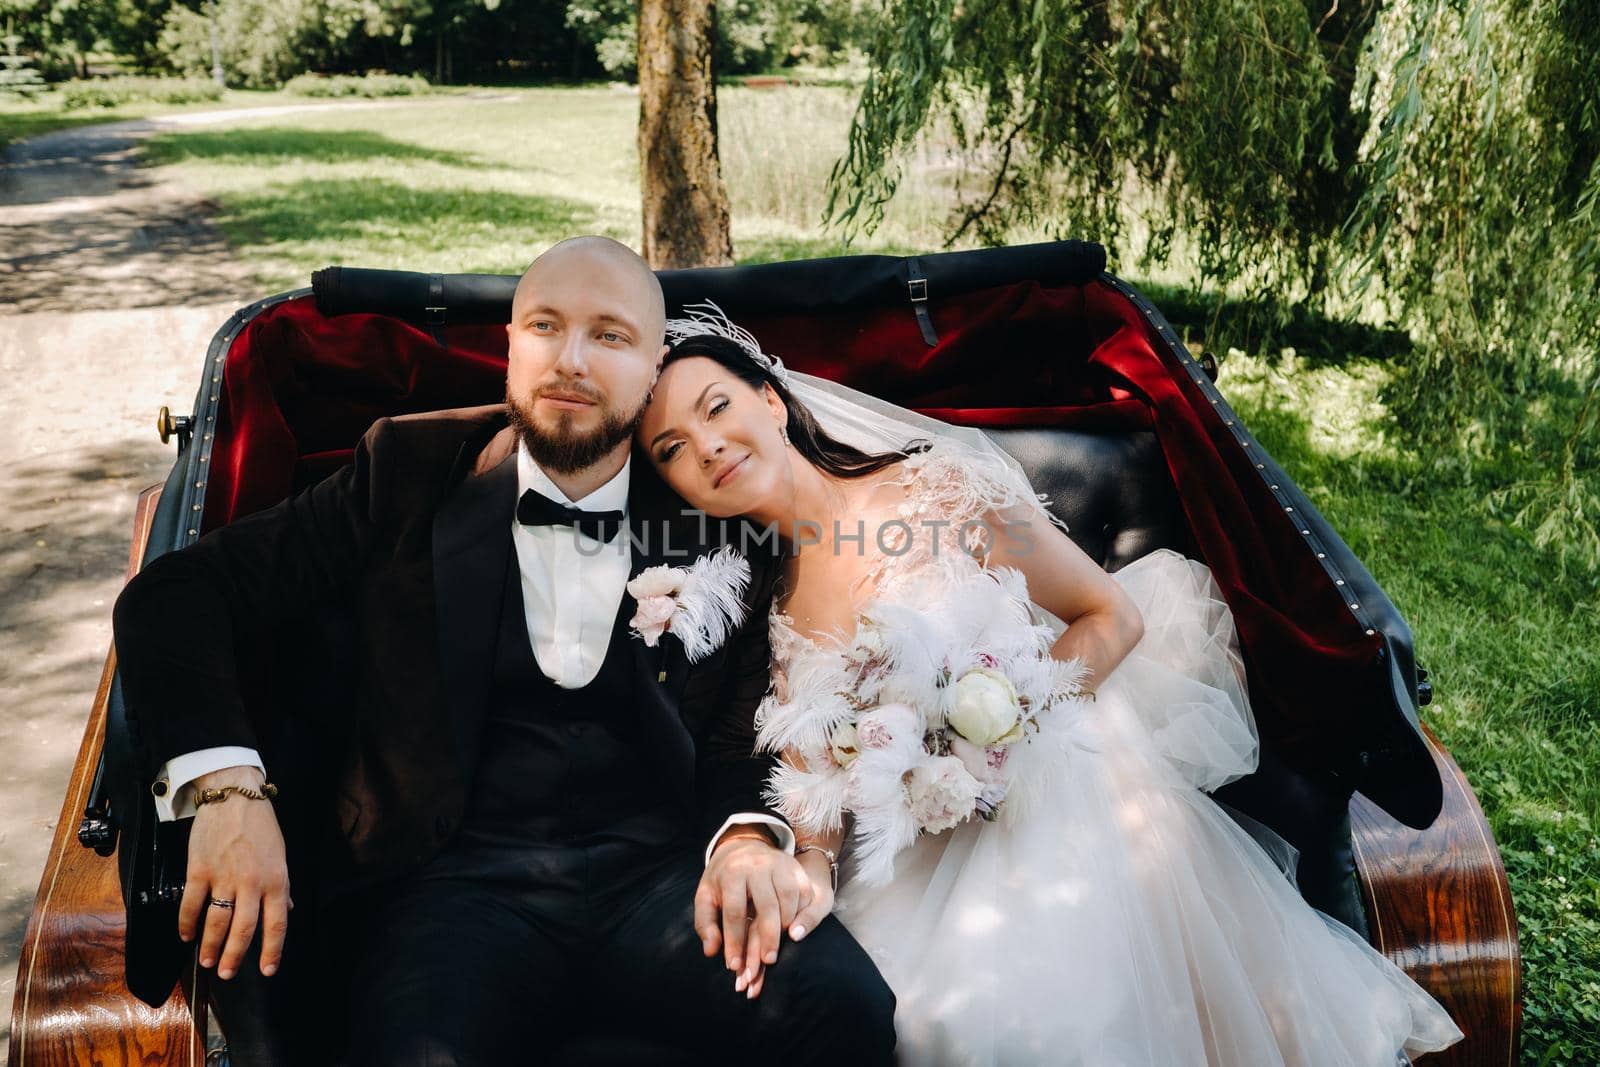 The bride and groom with a bouquet are sitting in a carriage in nature in retro style by Lobachad